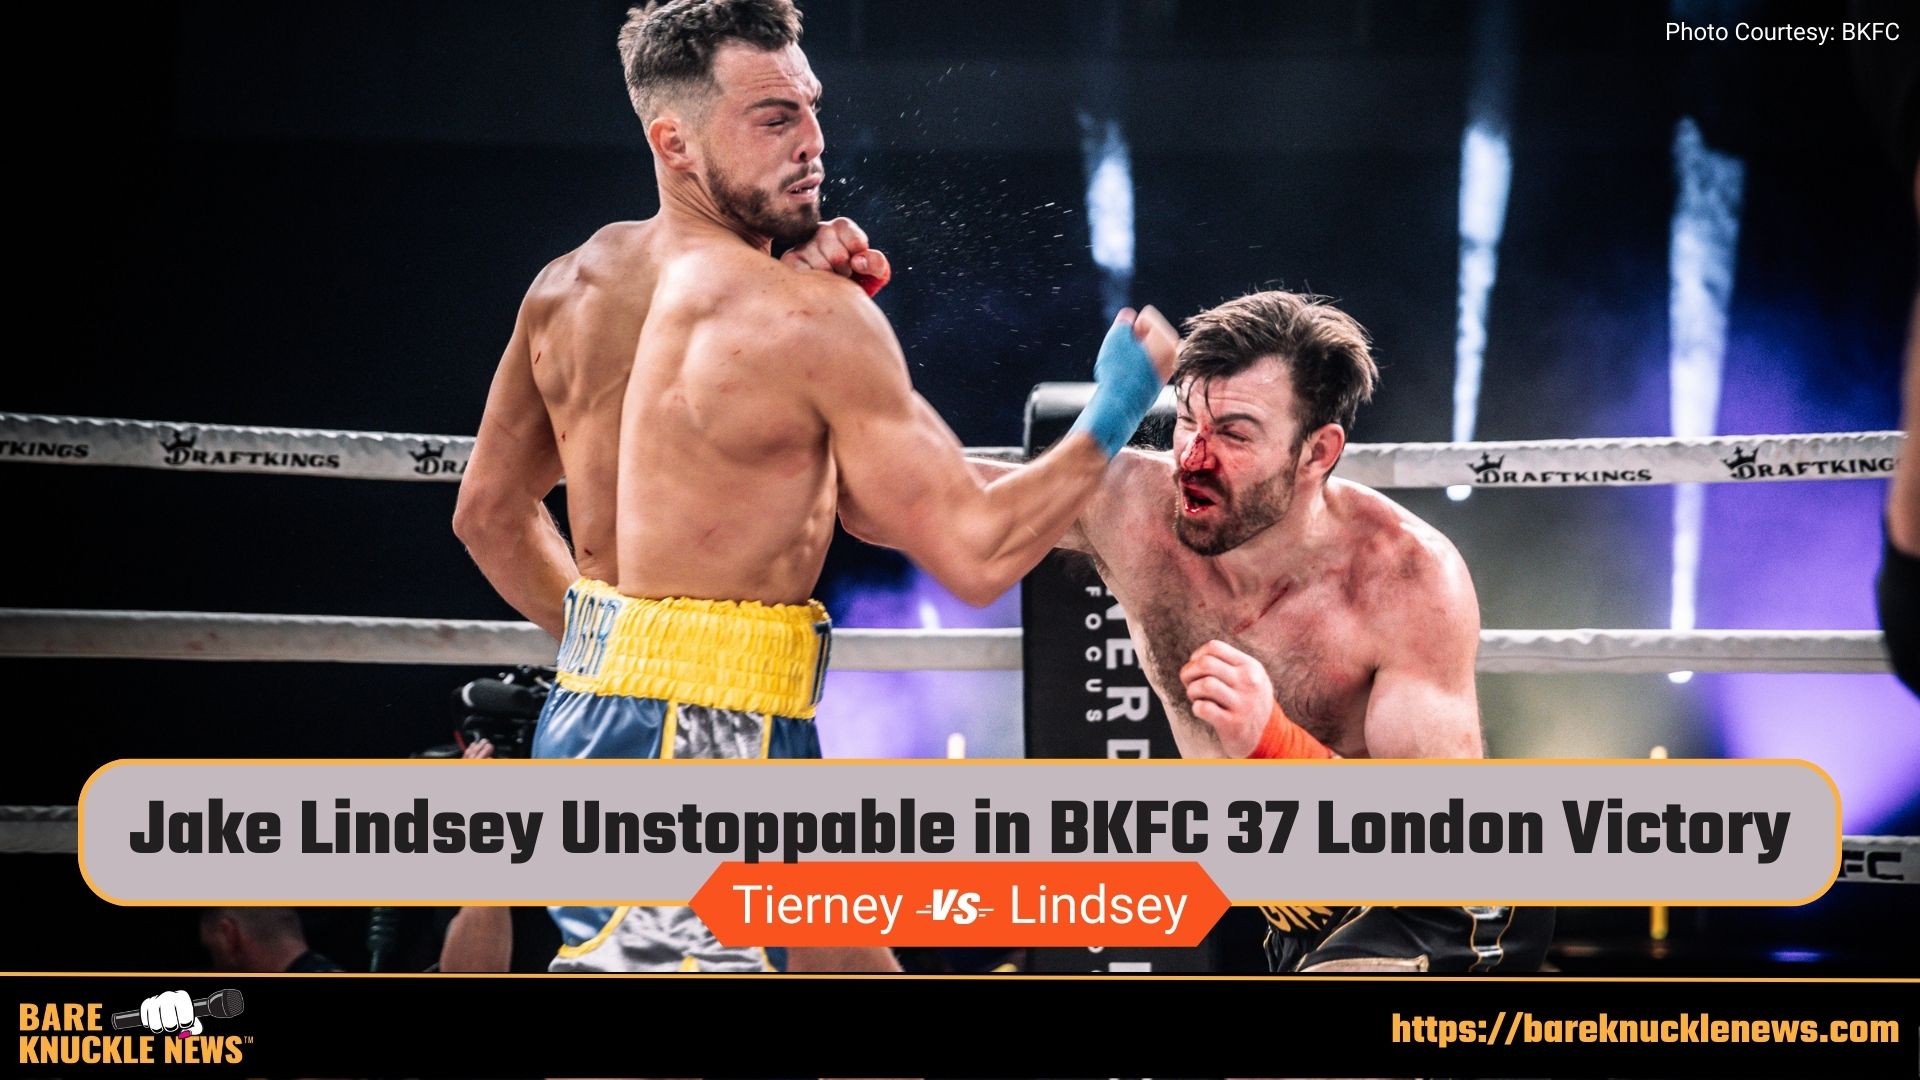 Jake Lindsey Unstoppable in BKFC 37 London Victory Article by Susan Cingari of Bare Knuckle News